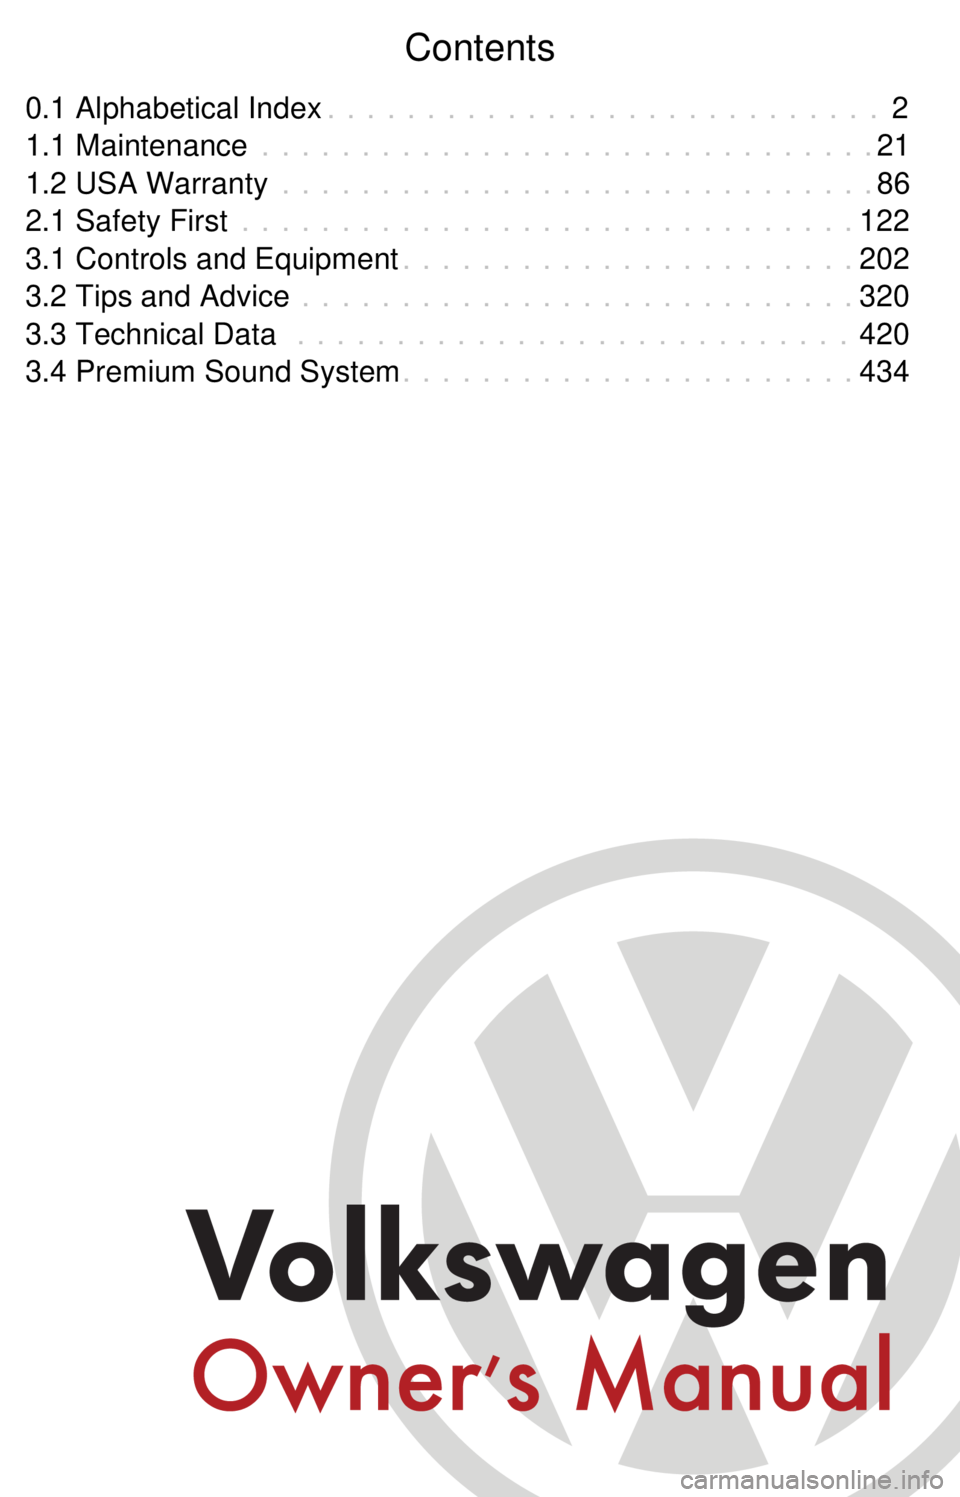 VOLKSWAGEN JETTA 2010  Owners Manual Contents
0.1 Alphabetical Index 2
. . . . . . . . . . . . . . . . . . . . . . . . . . . .
1.1 Maintenance 21
. . . . . . . . . . . . . . . . . . . . . . . . . . . . . . .
1.2 USA Warranty 86
. . . . .